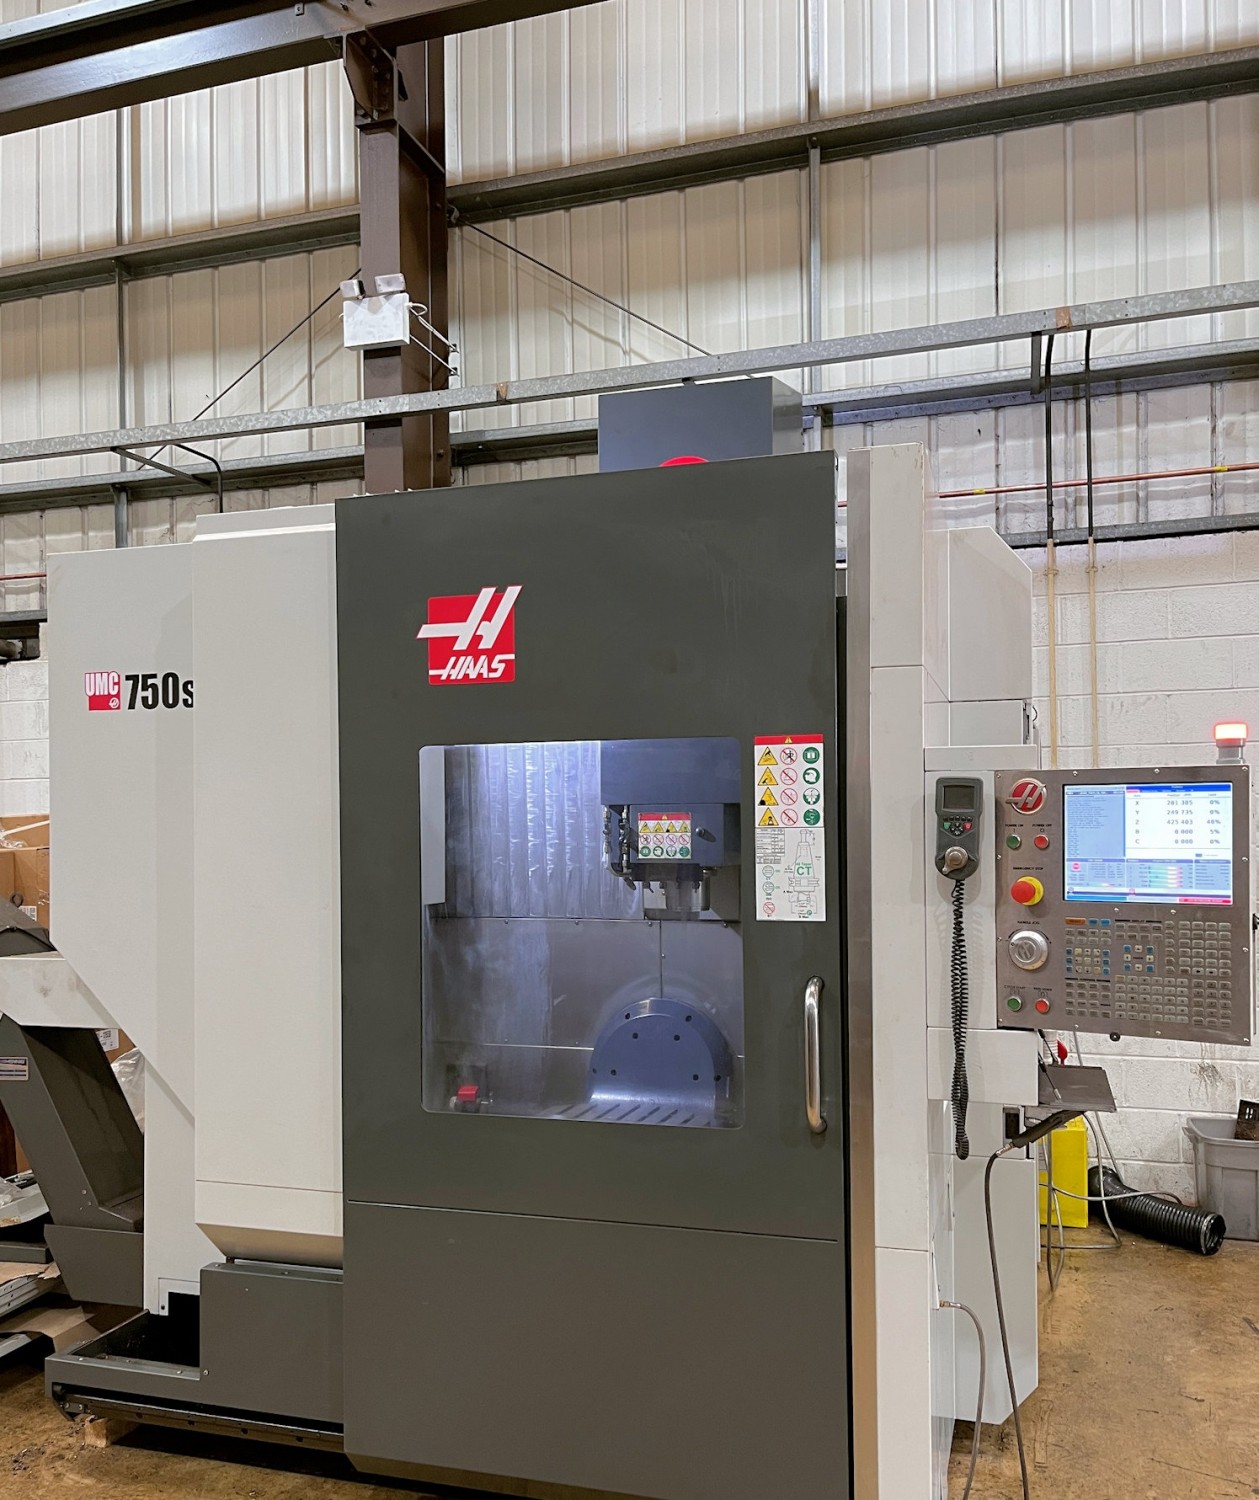 Centre d'usinage 5 axes HAAS type UMC 750SS